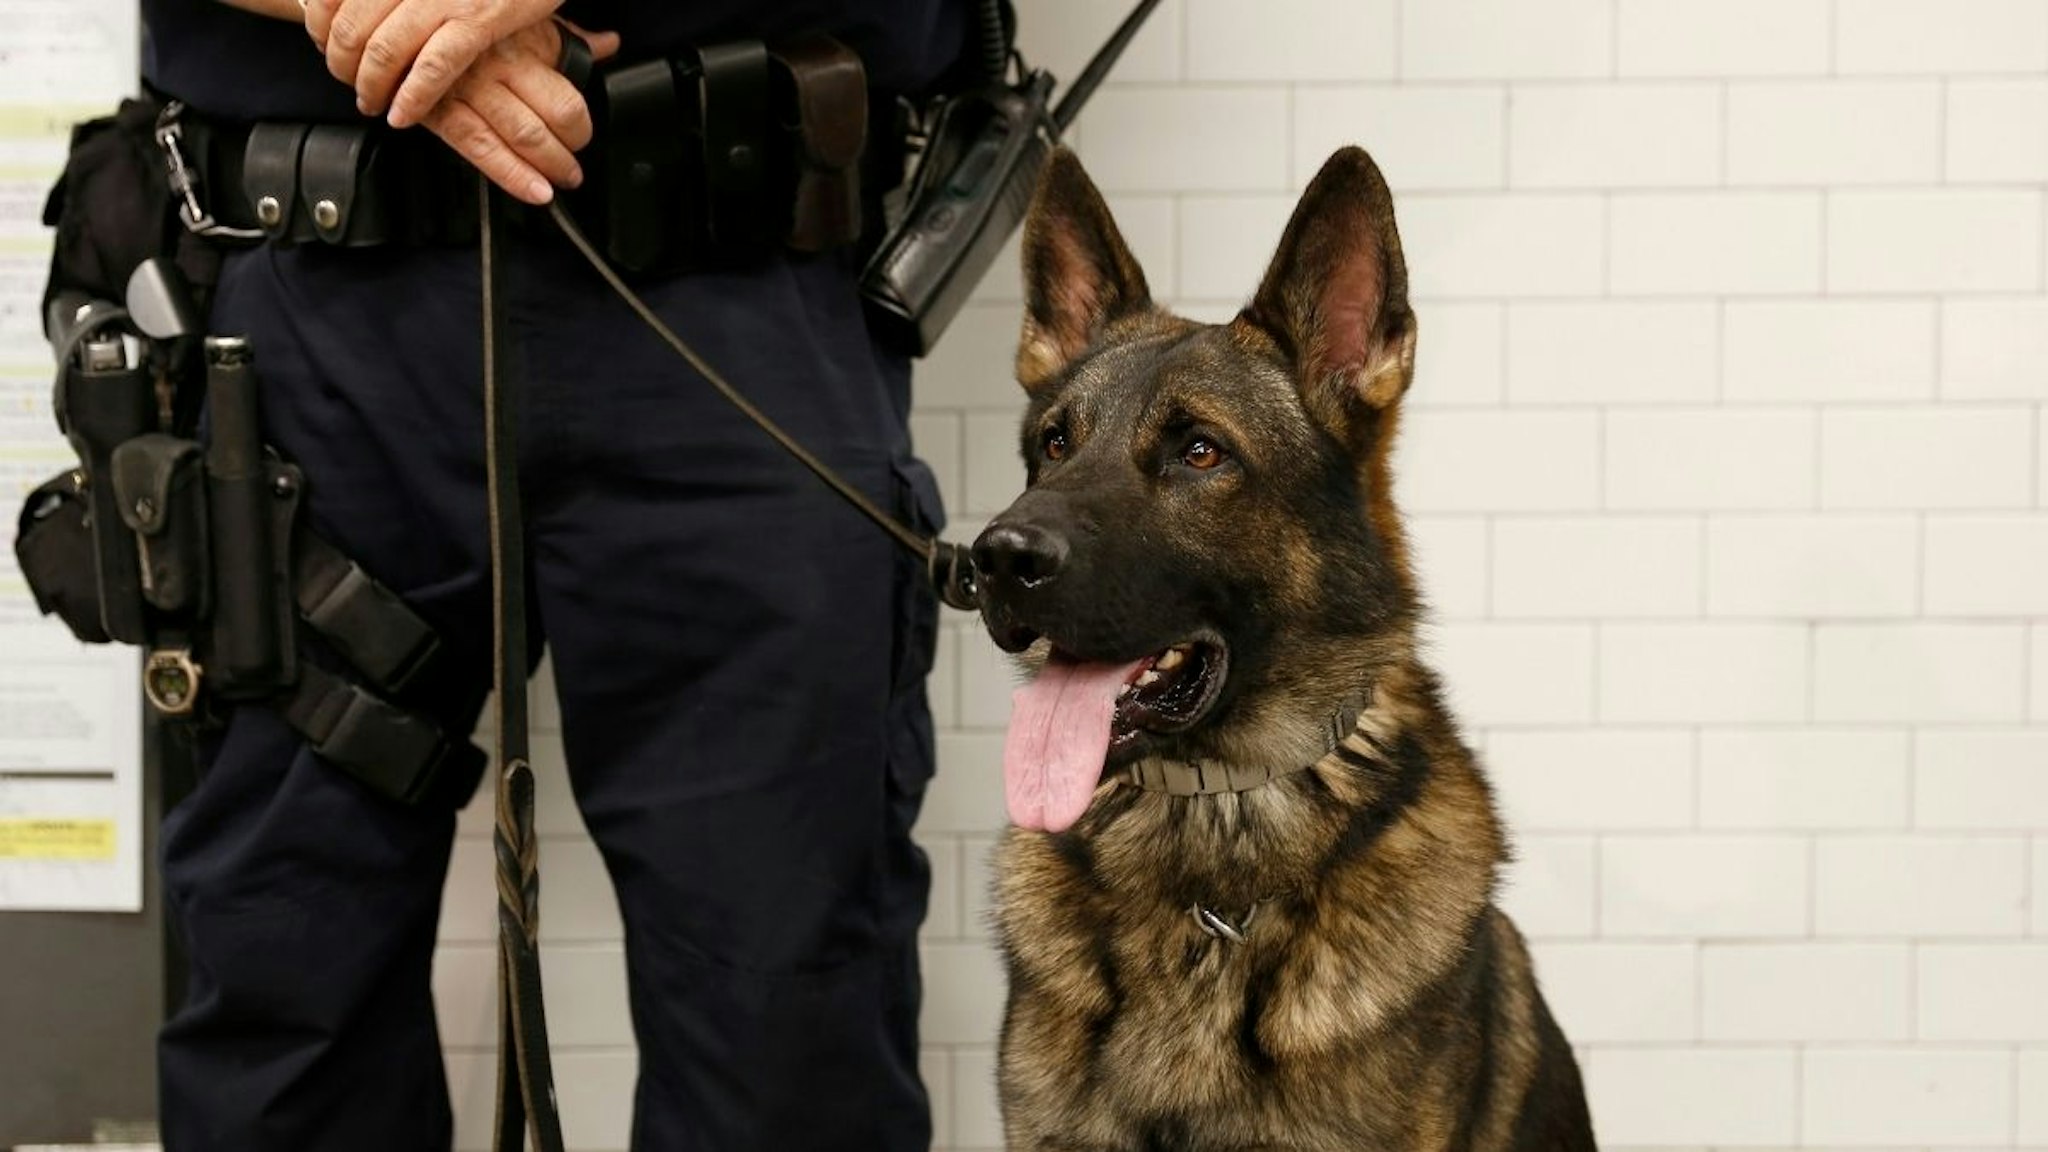 New York City Police officer stands guard with K-9 police dog in a metro station in New York, United States on 17 September, 2014.